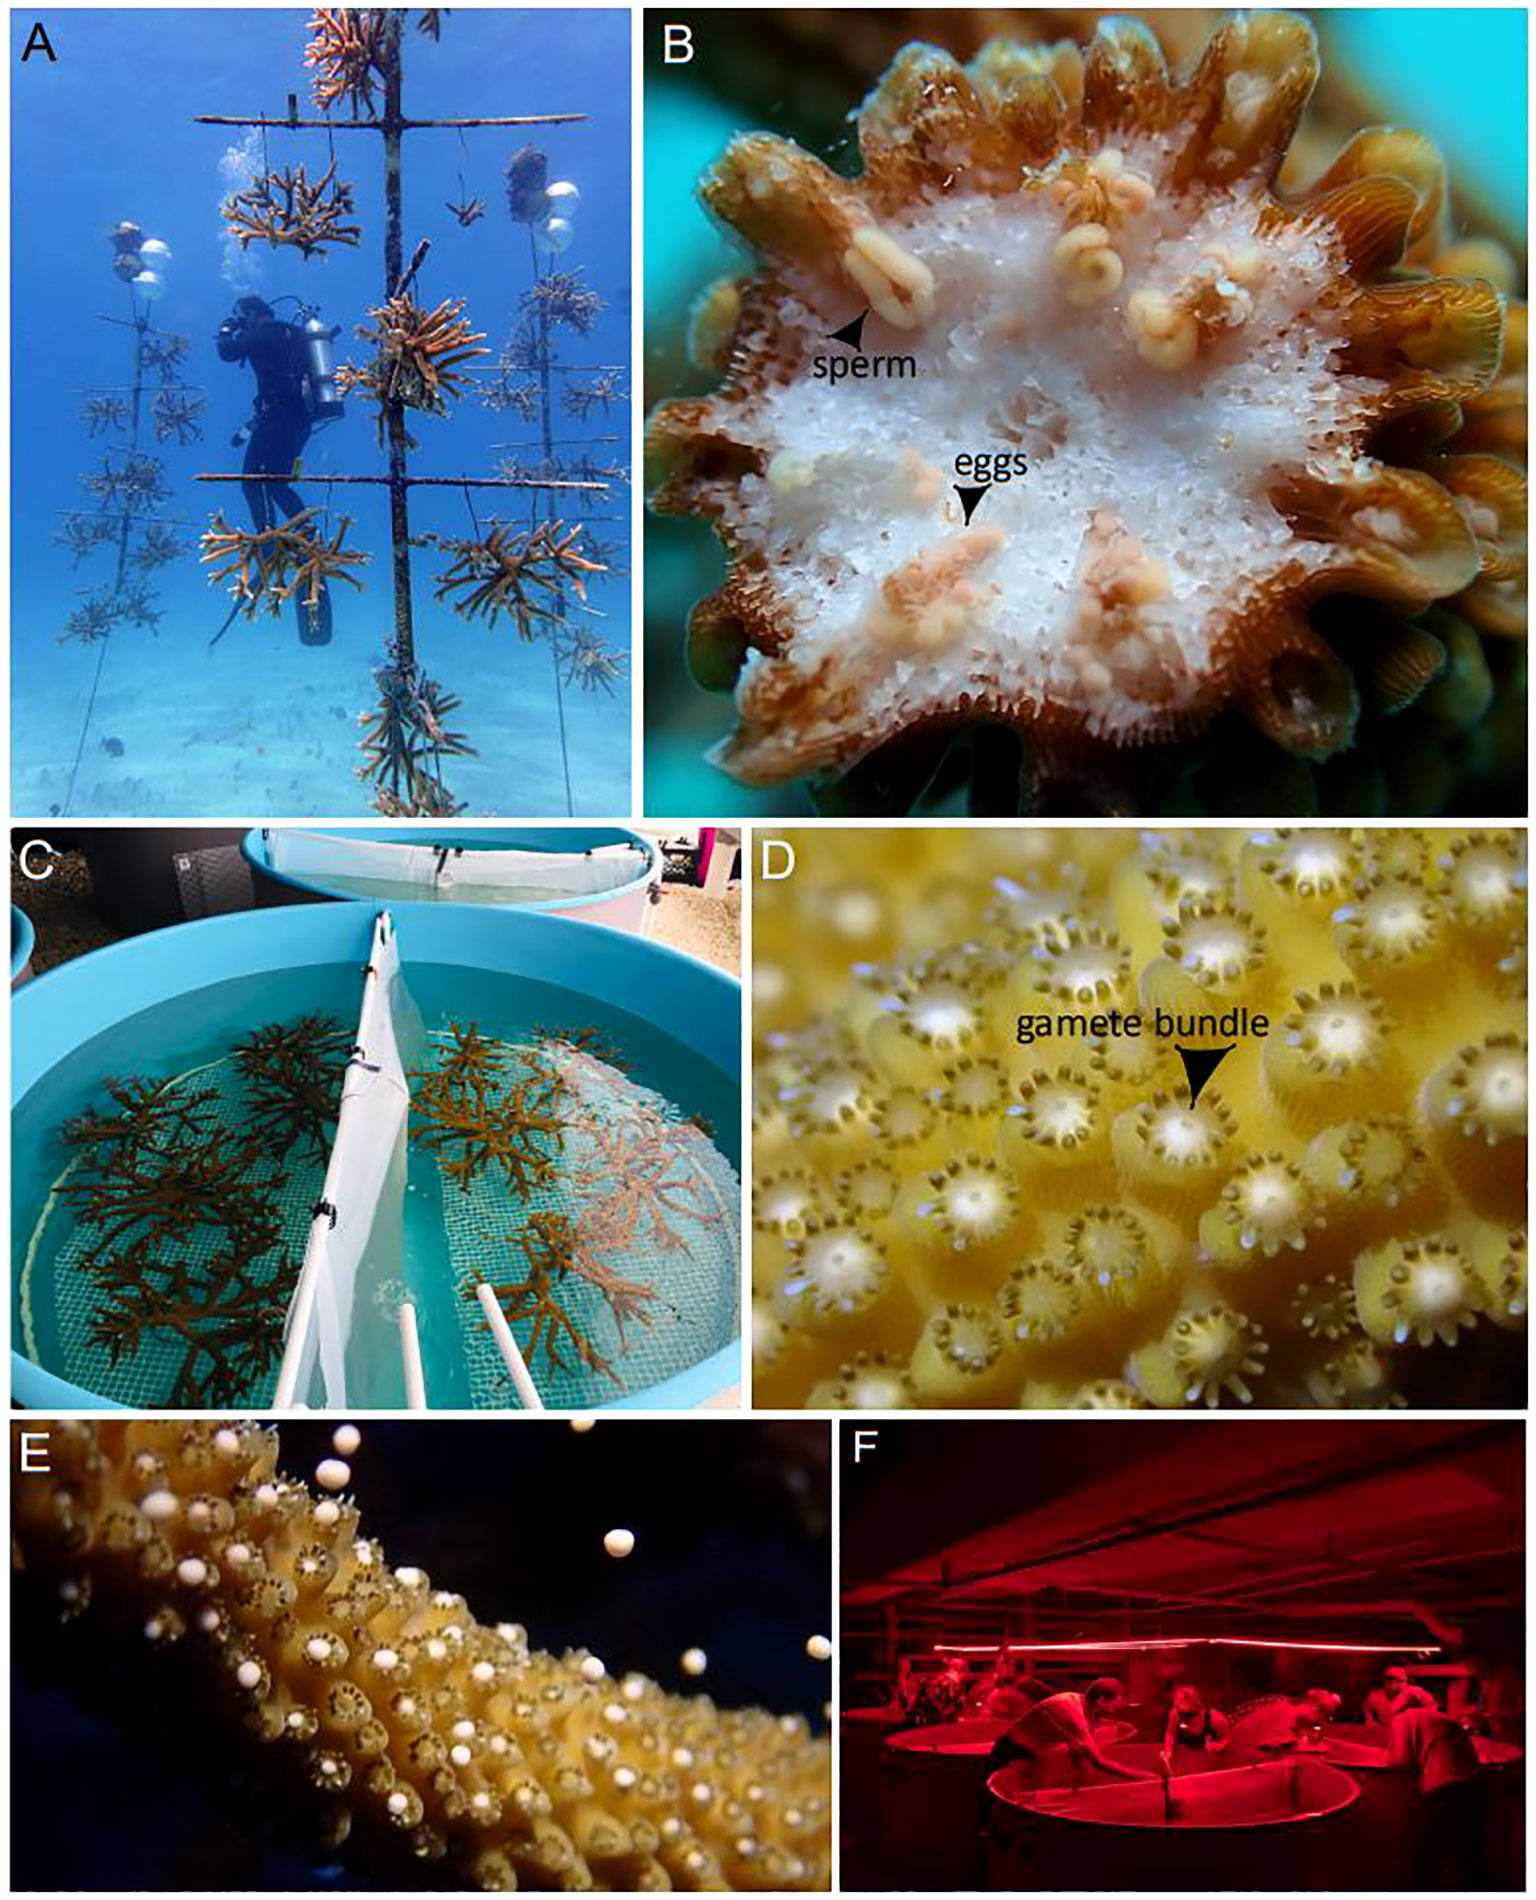 Fields of Caribbean staghorn corals discovered off Florida coast